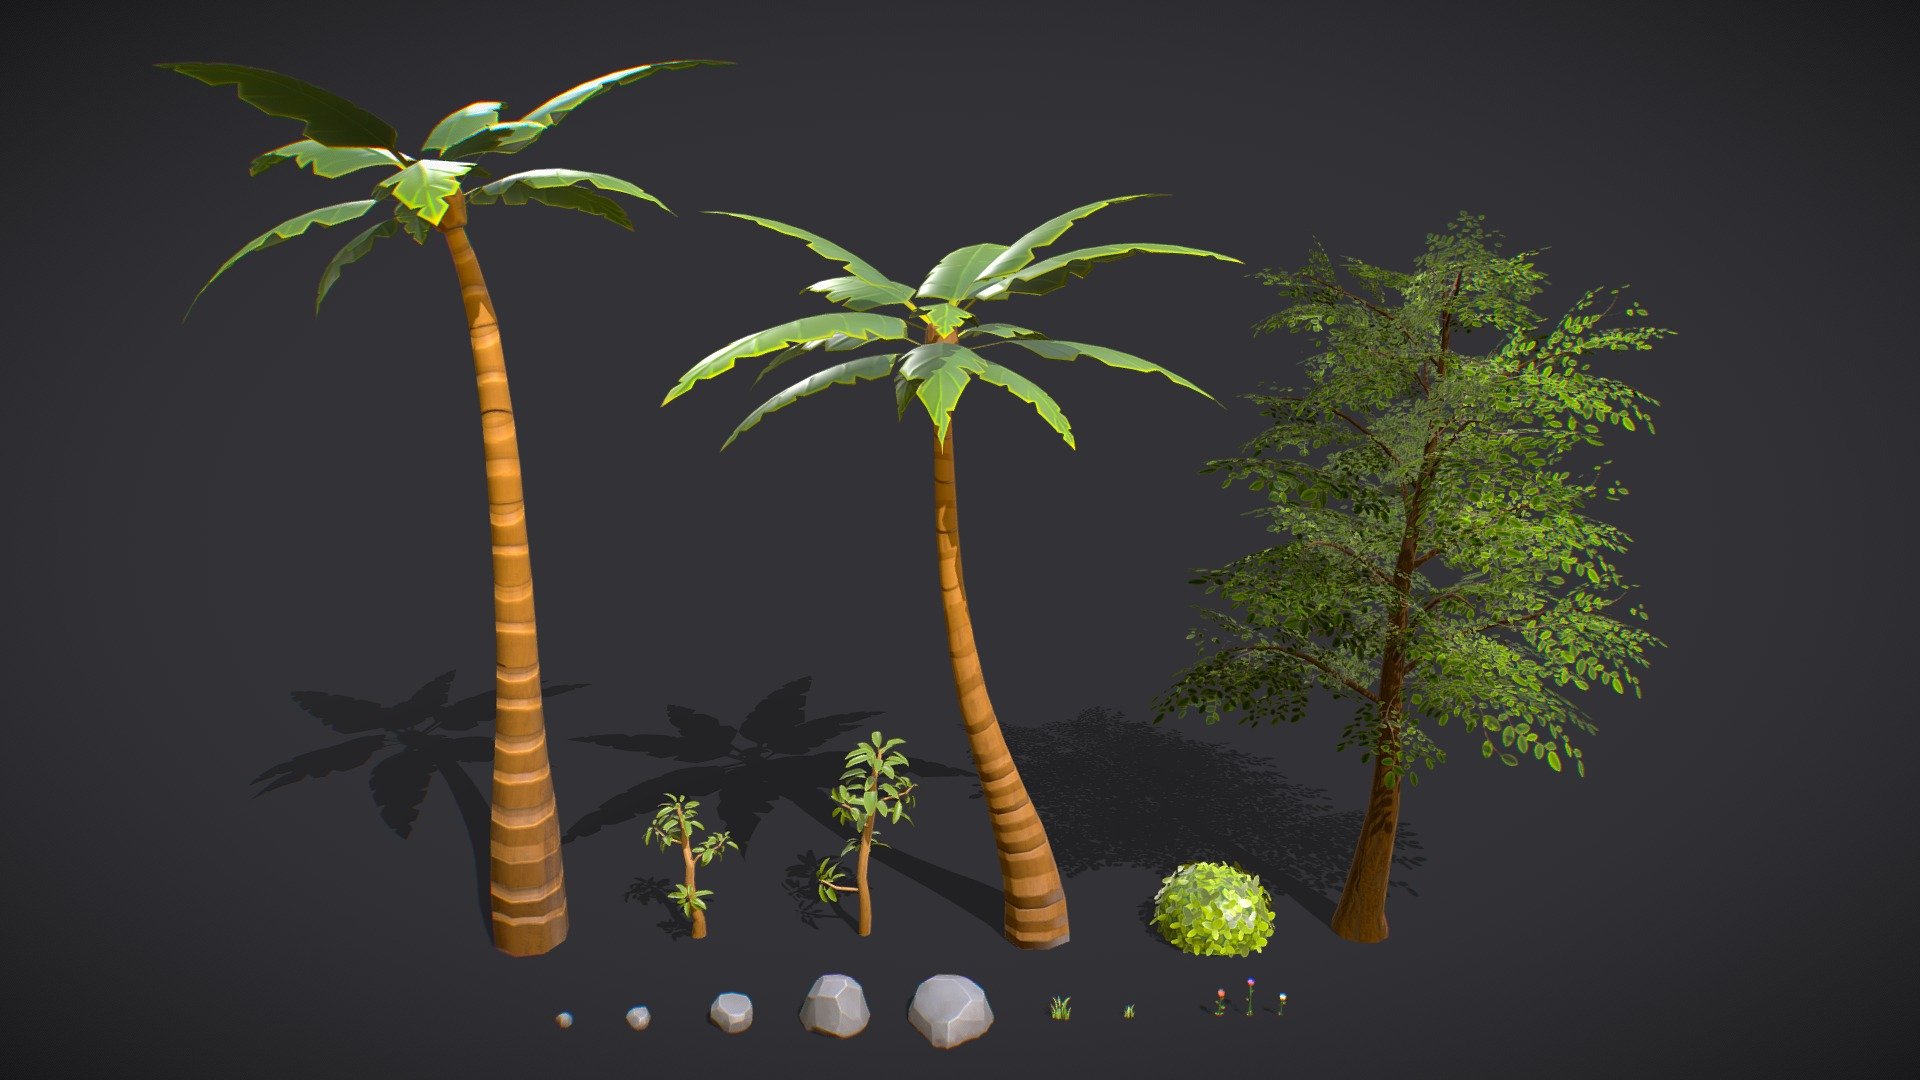 A Package of Stylized Nature vegetation incluiding Trees, Palm Trees, Flowers and more.

Are you liked this Package? Feel free to take a look on my another models! Here

Features:

.Fbx, .Obj, .Uasset and .Blend files.

Low Poly Mesh game-ready.

Real-World Scale (centimeters).

Unreal Project 4.18+

Custom Collision for Unreal Engine 4 (Handmade).

Tris Count: 40 to 6,429.

Number of Textures (PNG): 42

Number of Textures (UE4): 26

Number of Materials (UE4): 3 Materials and 10 Material Instances

PBR Textures (512x512), (1024x1024) and (4096x4096) (PNG).

Type of Textures: Base Color, Roughness, Metallic, Normal Map and Ambient Occlusion (PNG).

Combined RMA texture (Roughness, Metallic and Ambient Occlusion) for Unreal Engine 4 (PNG) 3d model